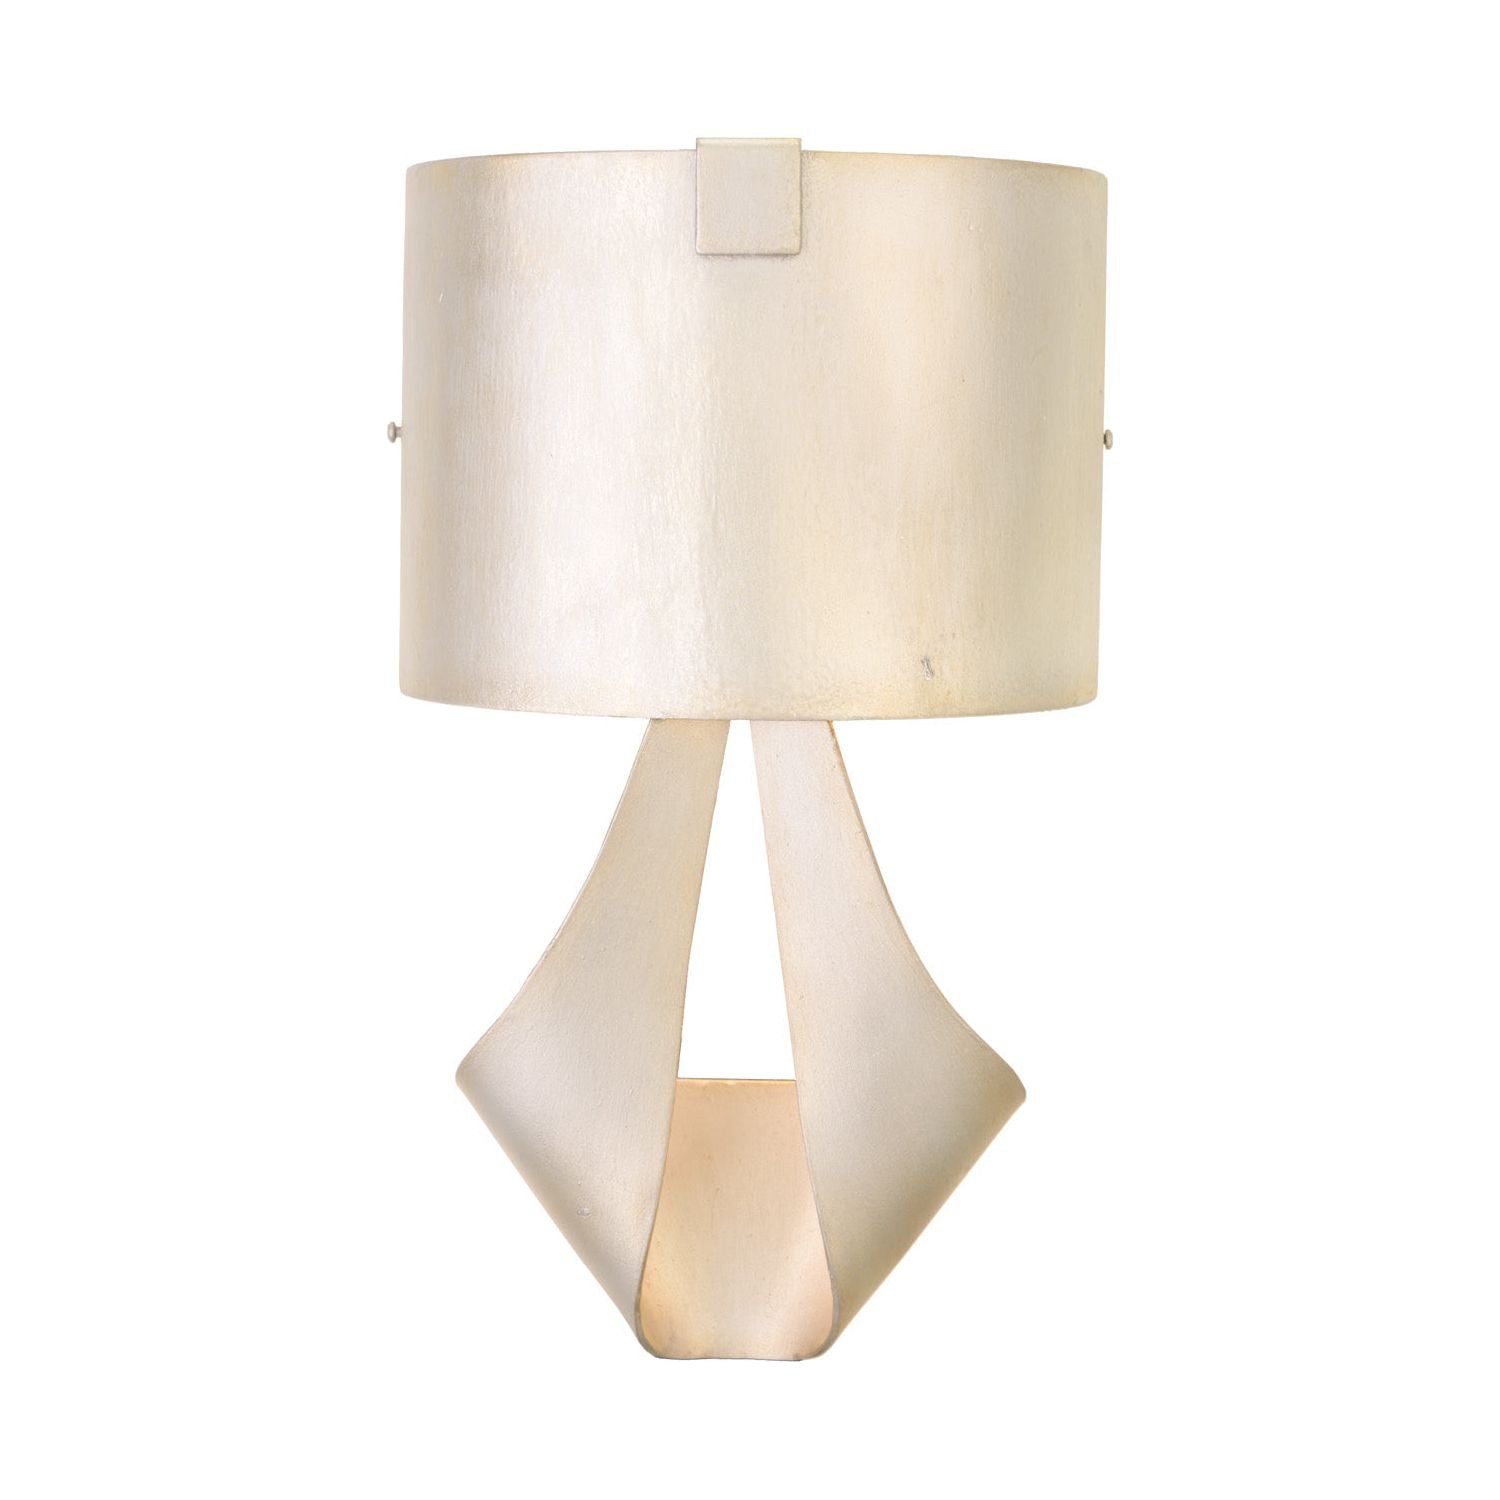 Kalco - 501123PS - One Light Wall Sconce - Barrymore - Pearl Silver